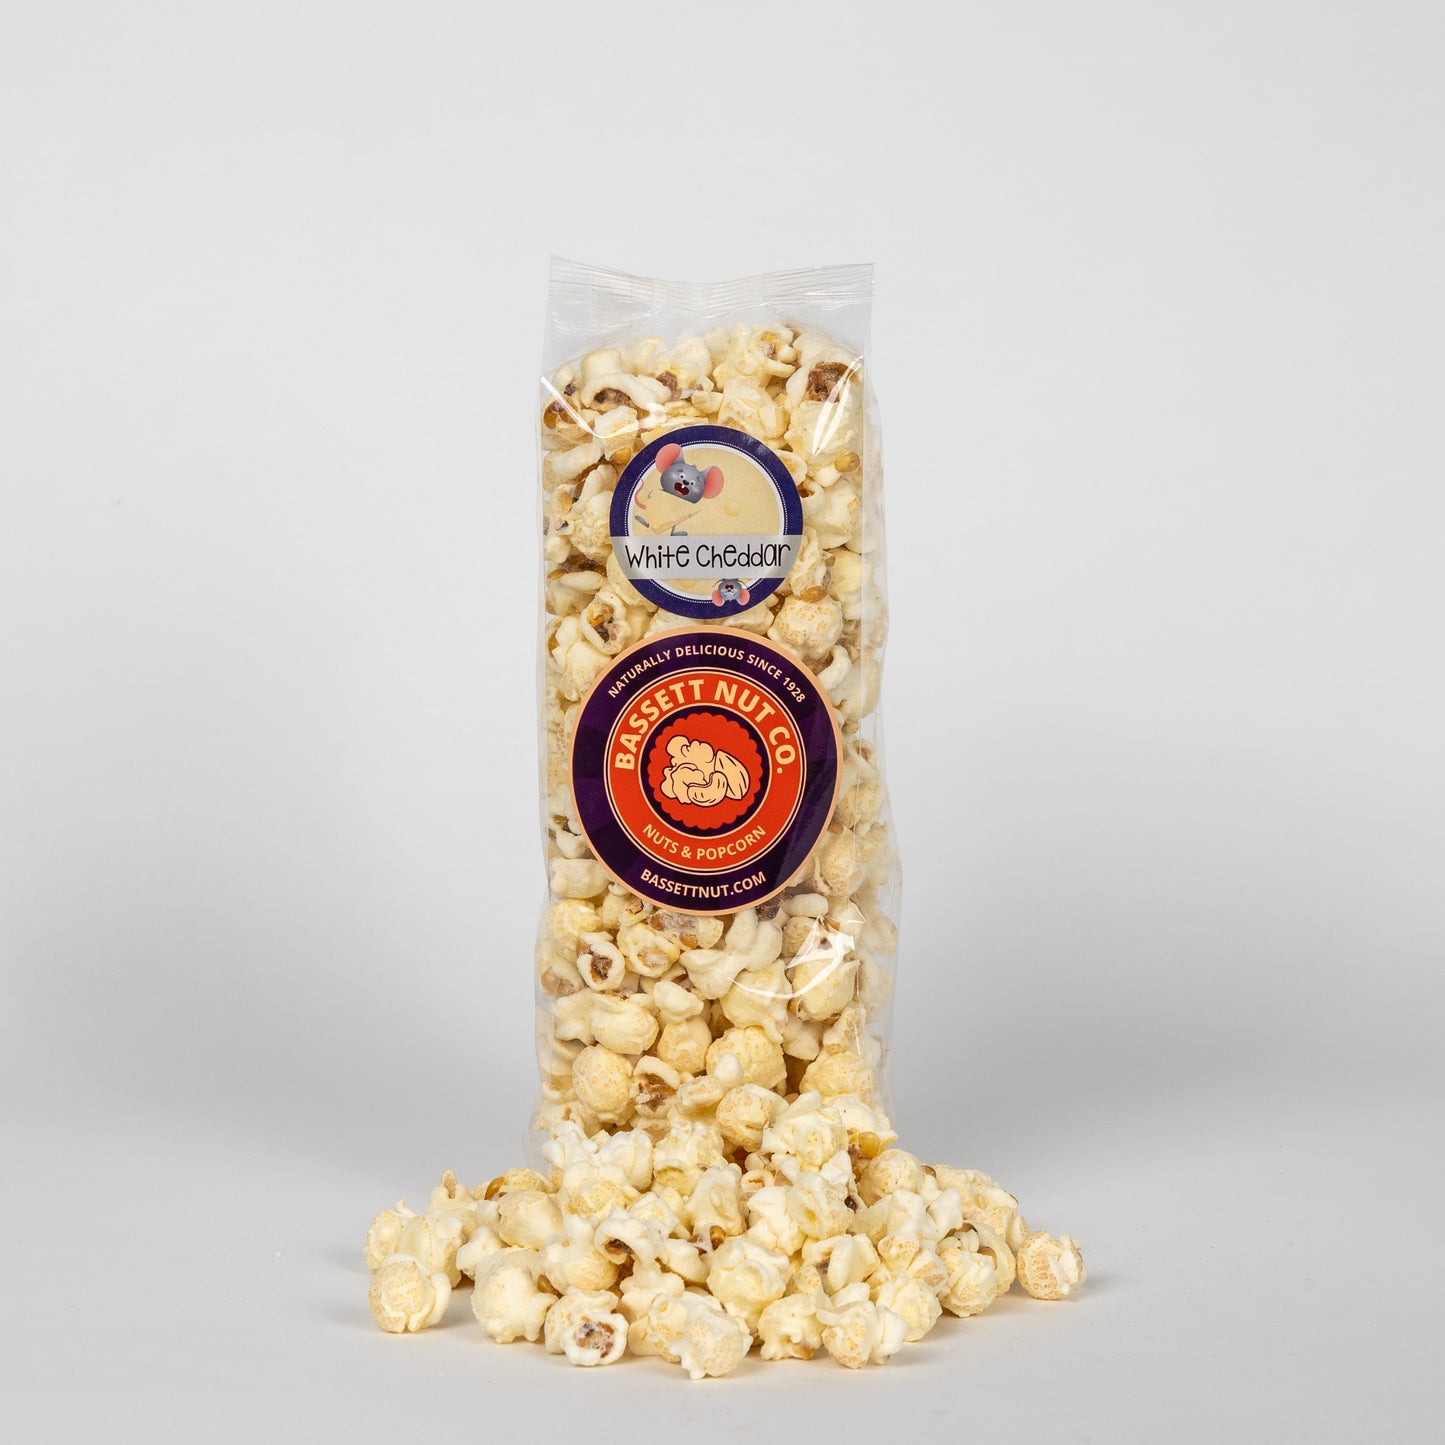 Mix and Match-Mix Medium Popcorn and 1 Pound Nuts (Eight Bags)